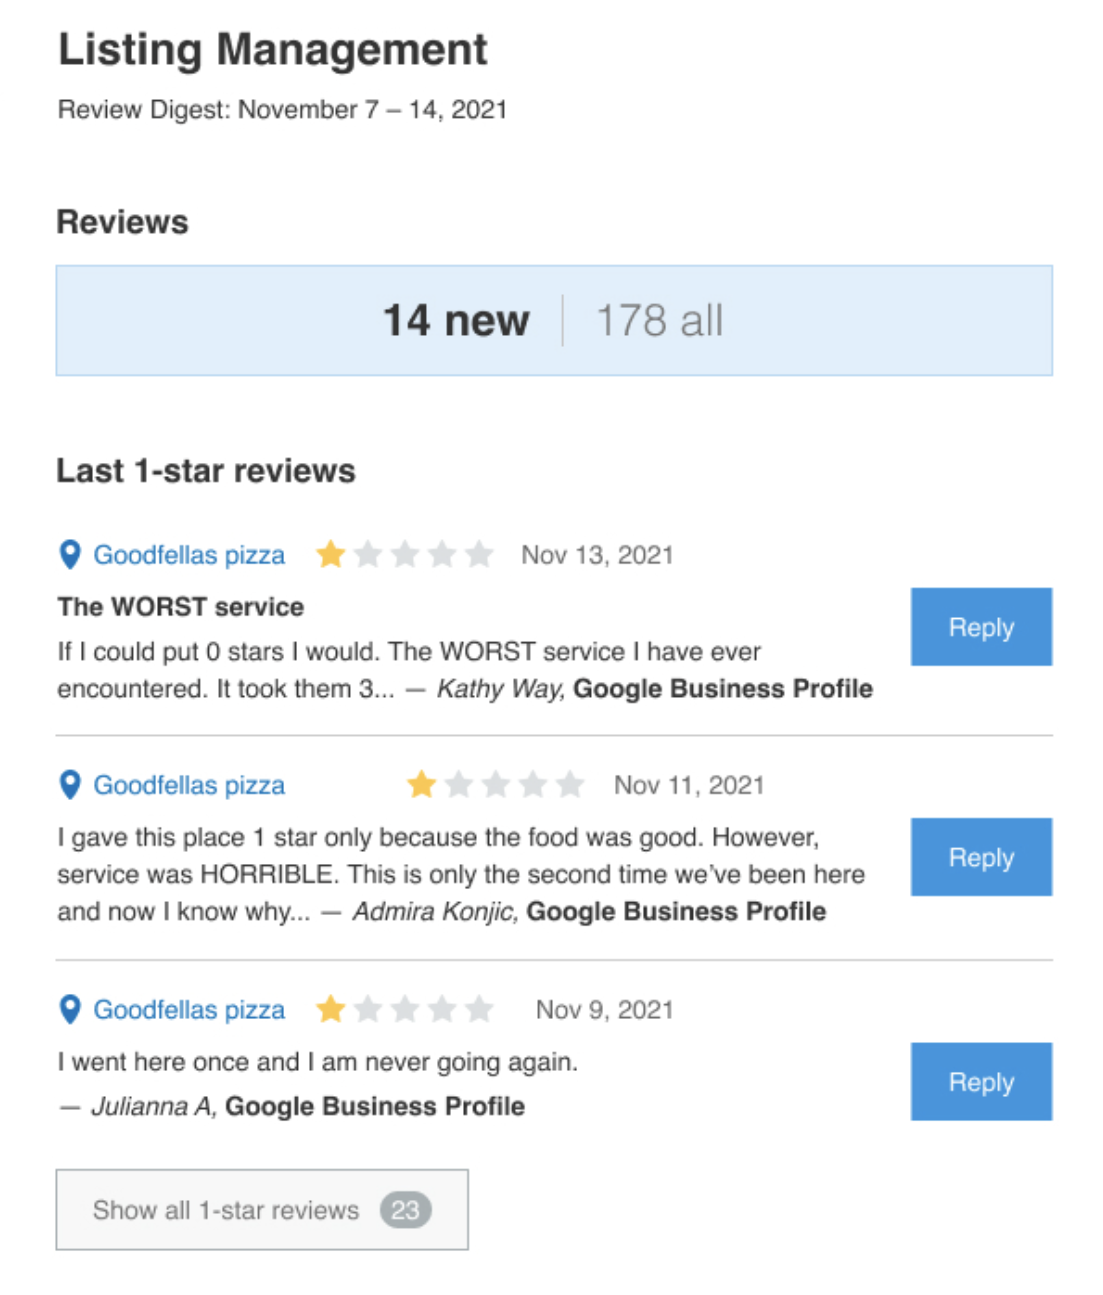 An email showing the dates of the review digest, the number of new reviews, the number of all reviews and the last 1-star reviews.